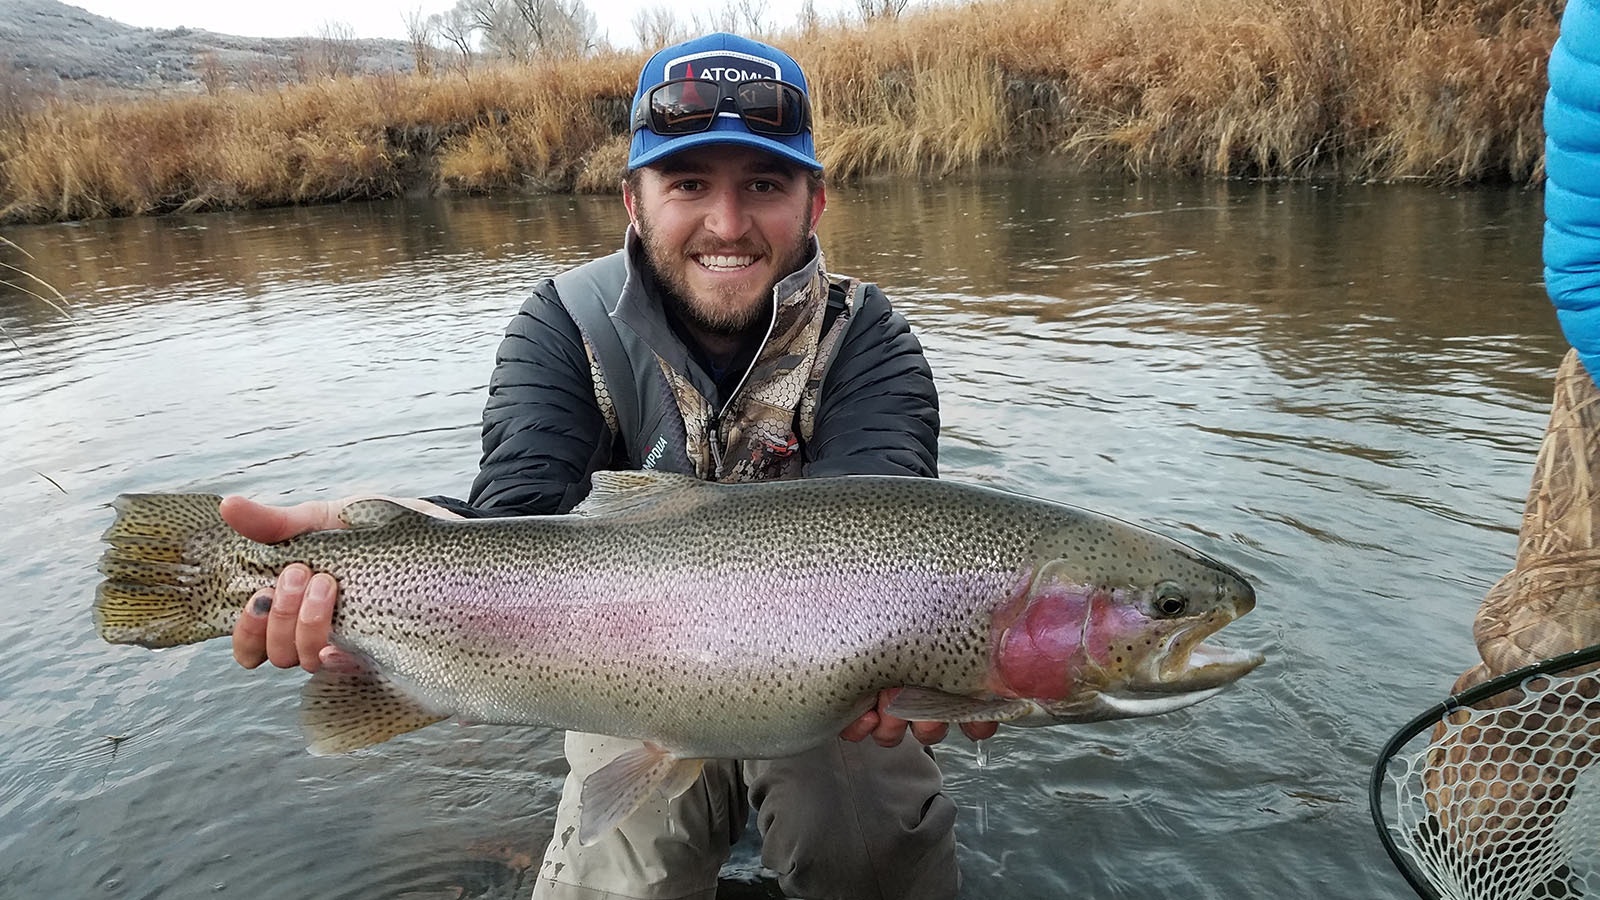 Michael Maroney is the marketing director and lead wildlife biologist for Infinite Outdoors, a Casper-based business that aims to increase opportunities for hunters and anglers on private land.